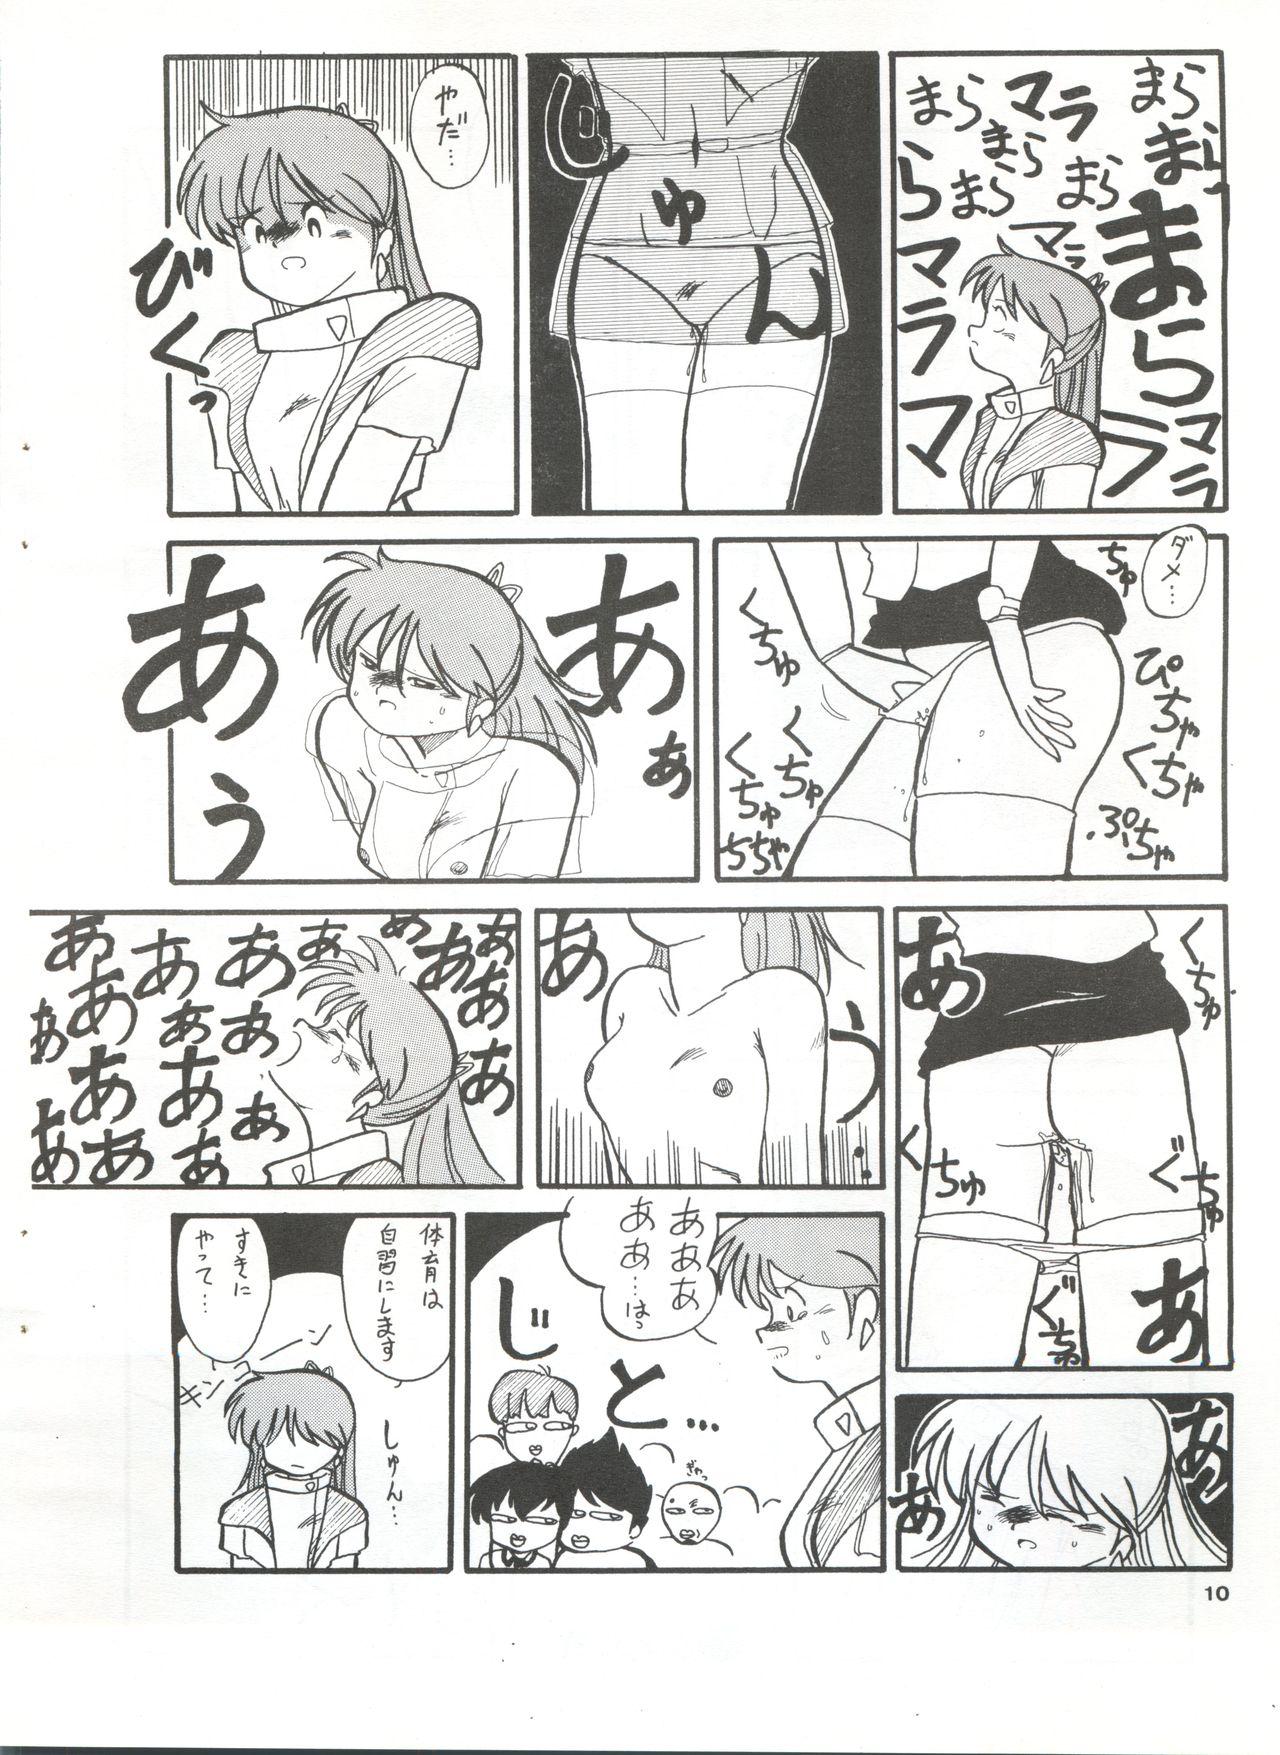 Hot Girls Getting Fucked YATTE! YATTE! Mission 1 - Dirty pair Sonic soldier borgman From - Page 9